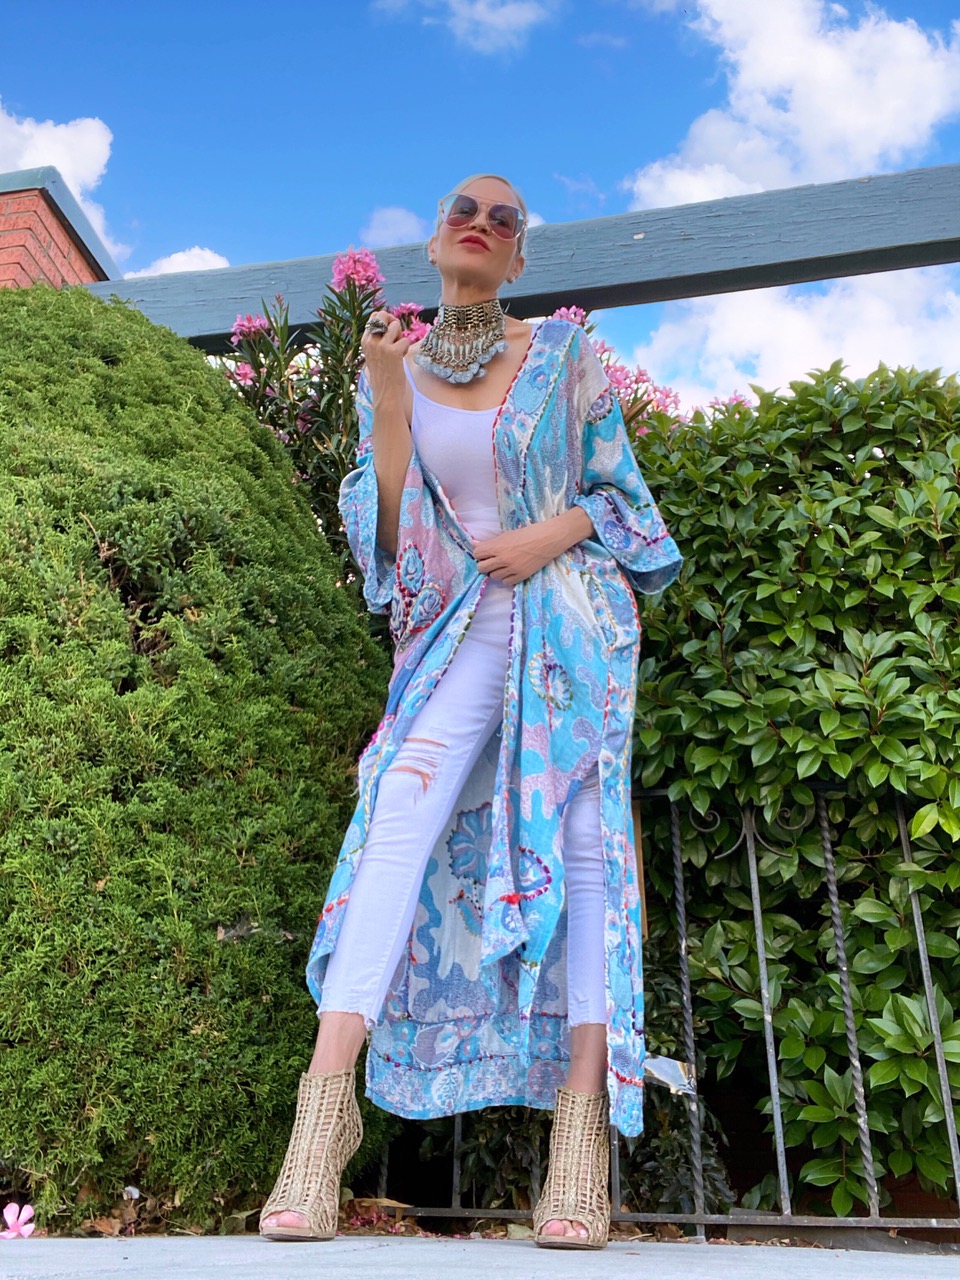 Lifestyle Influencer, Jamie Lewinger of More Than Turquoise wearing the Merlion Duster from Soft Surroundings